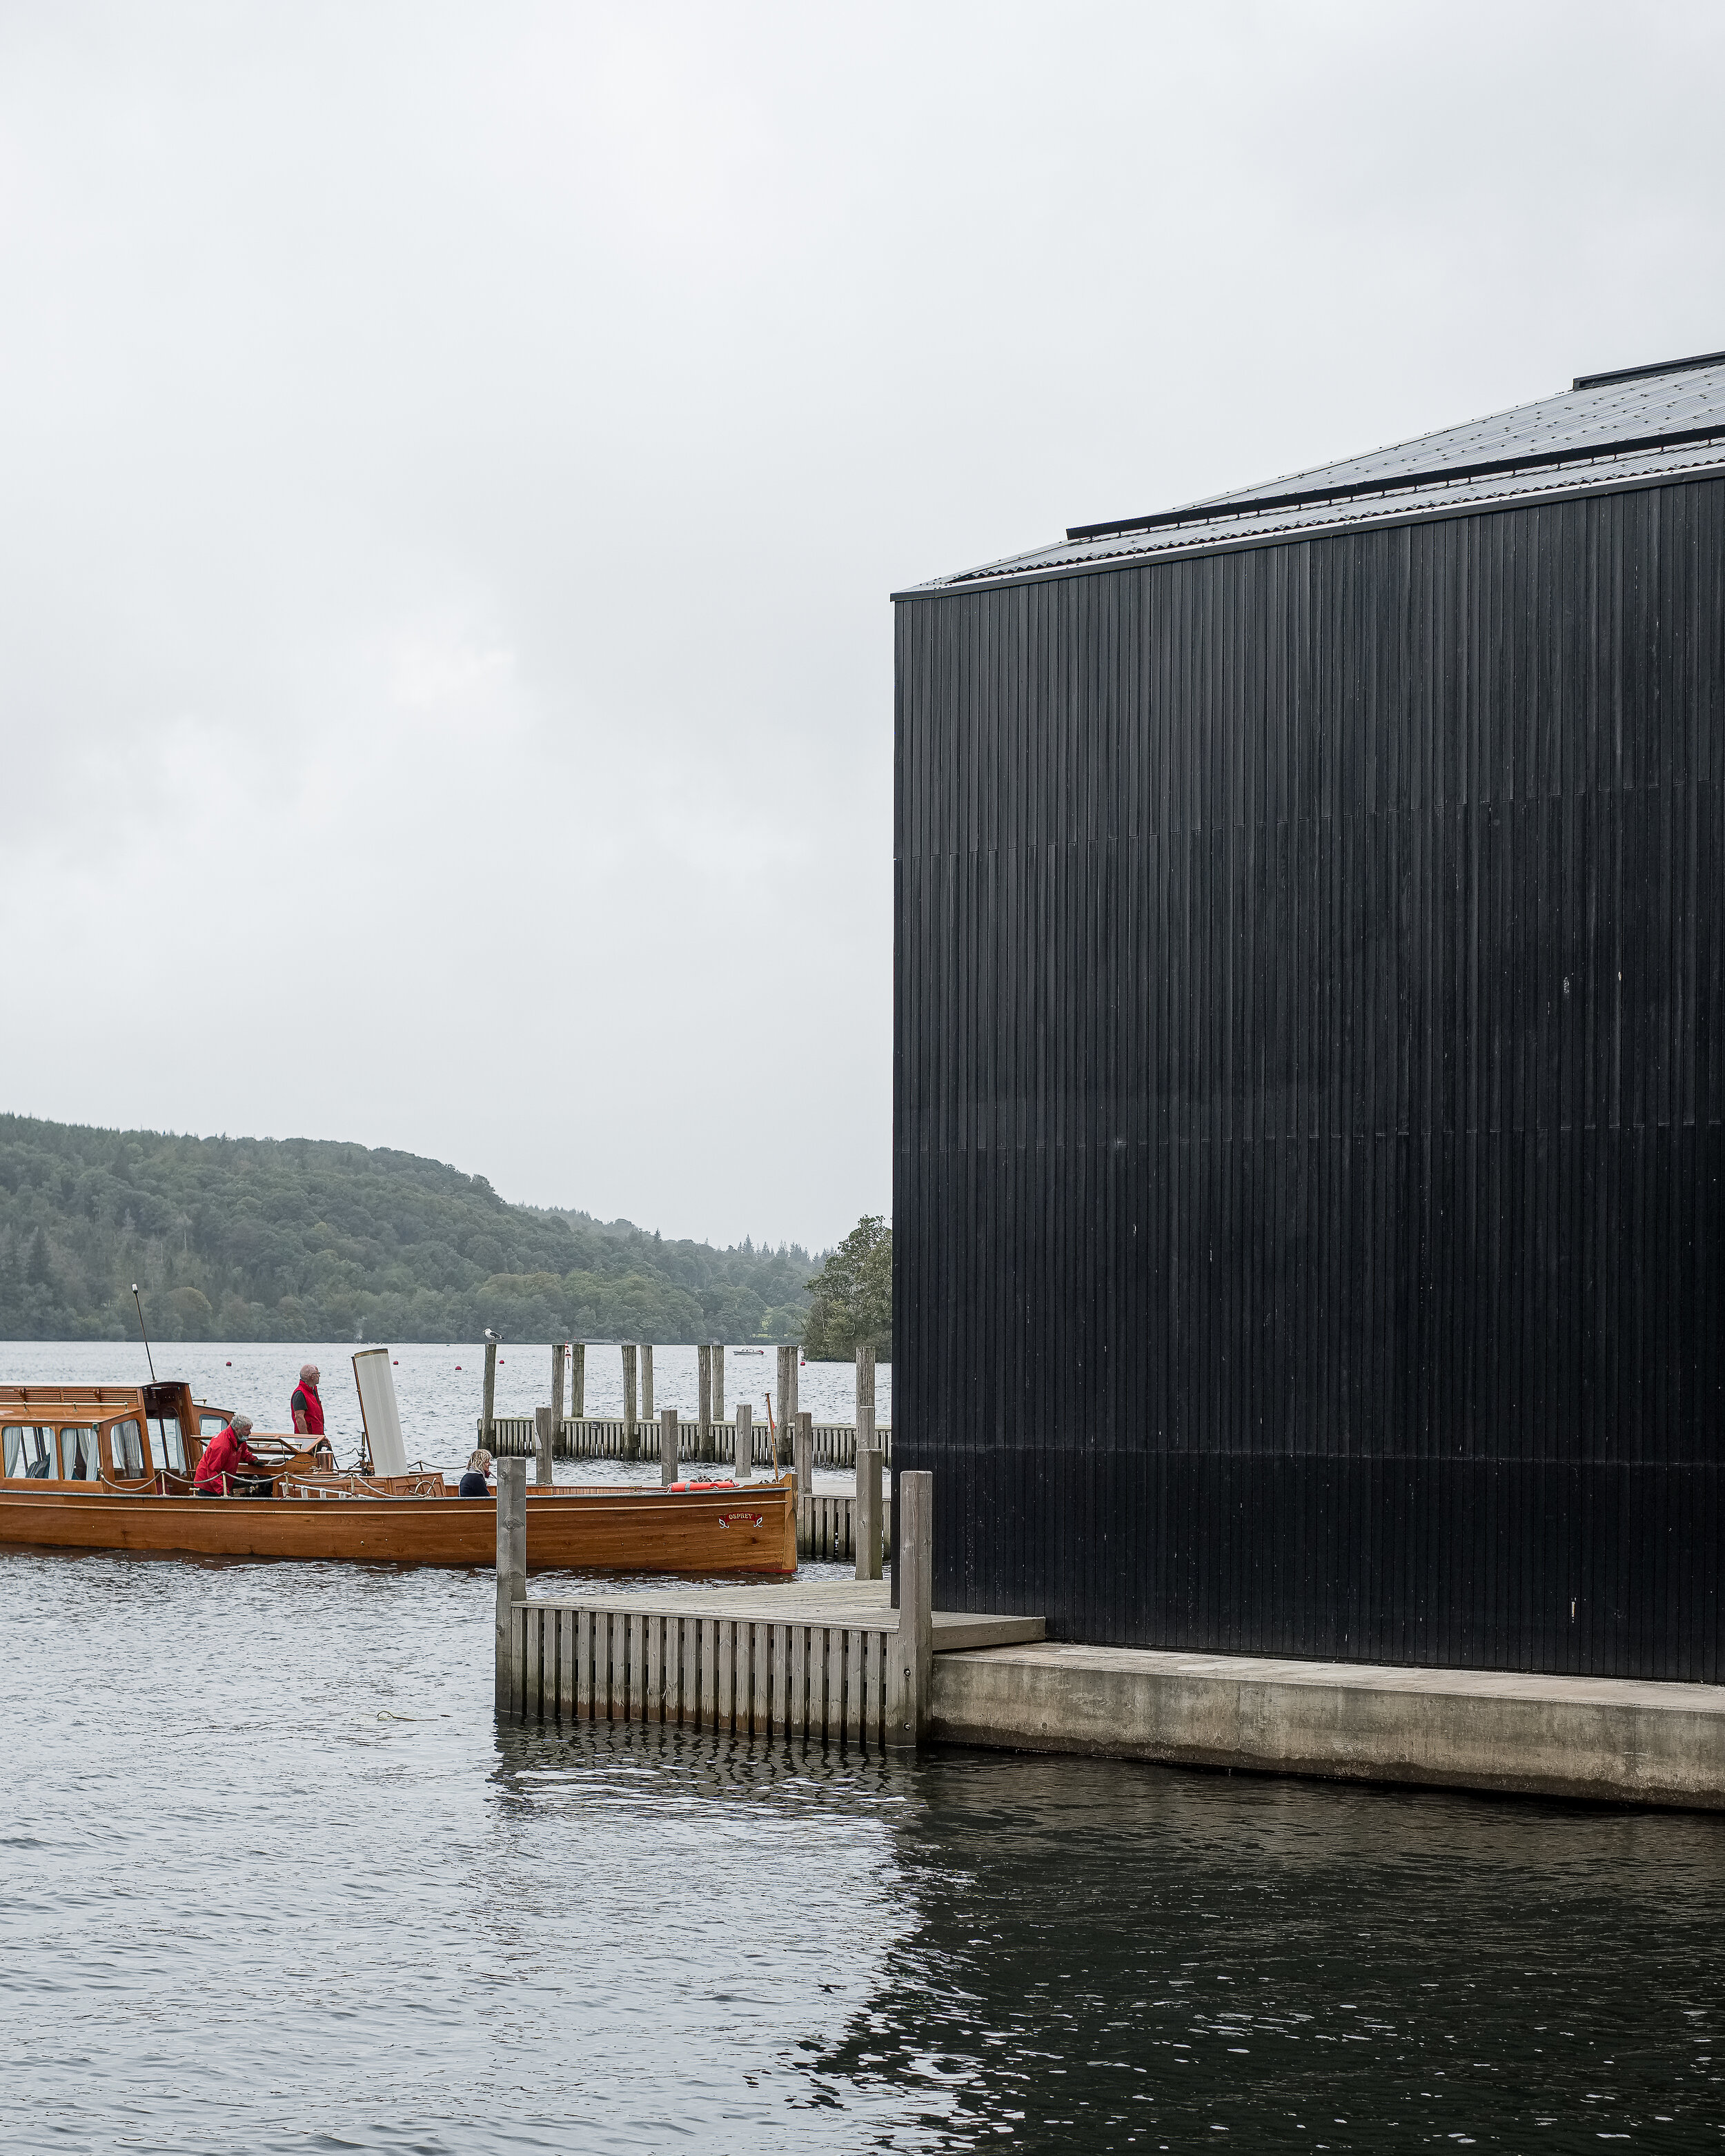 Fred+Howarth+Photography_Winderemere+Jetty+Museum_03.jpg